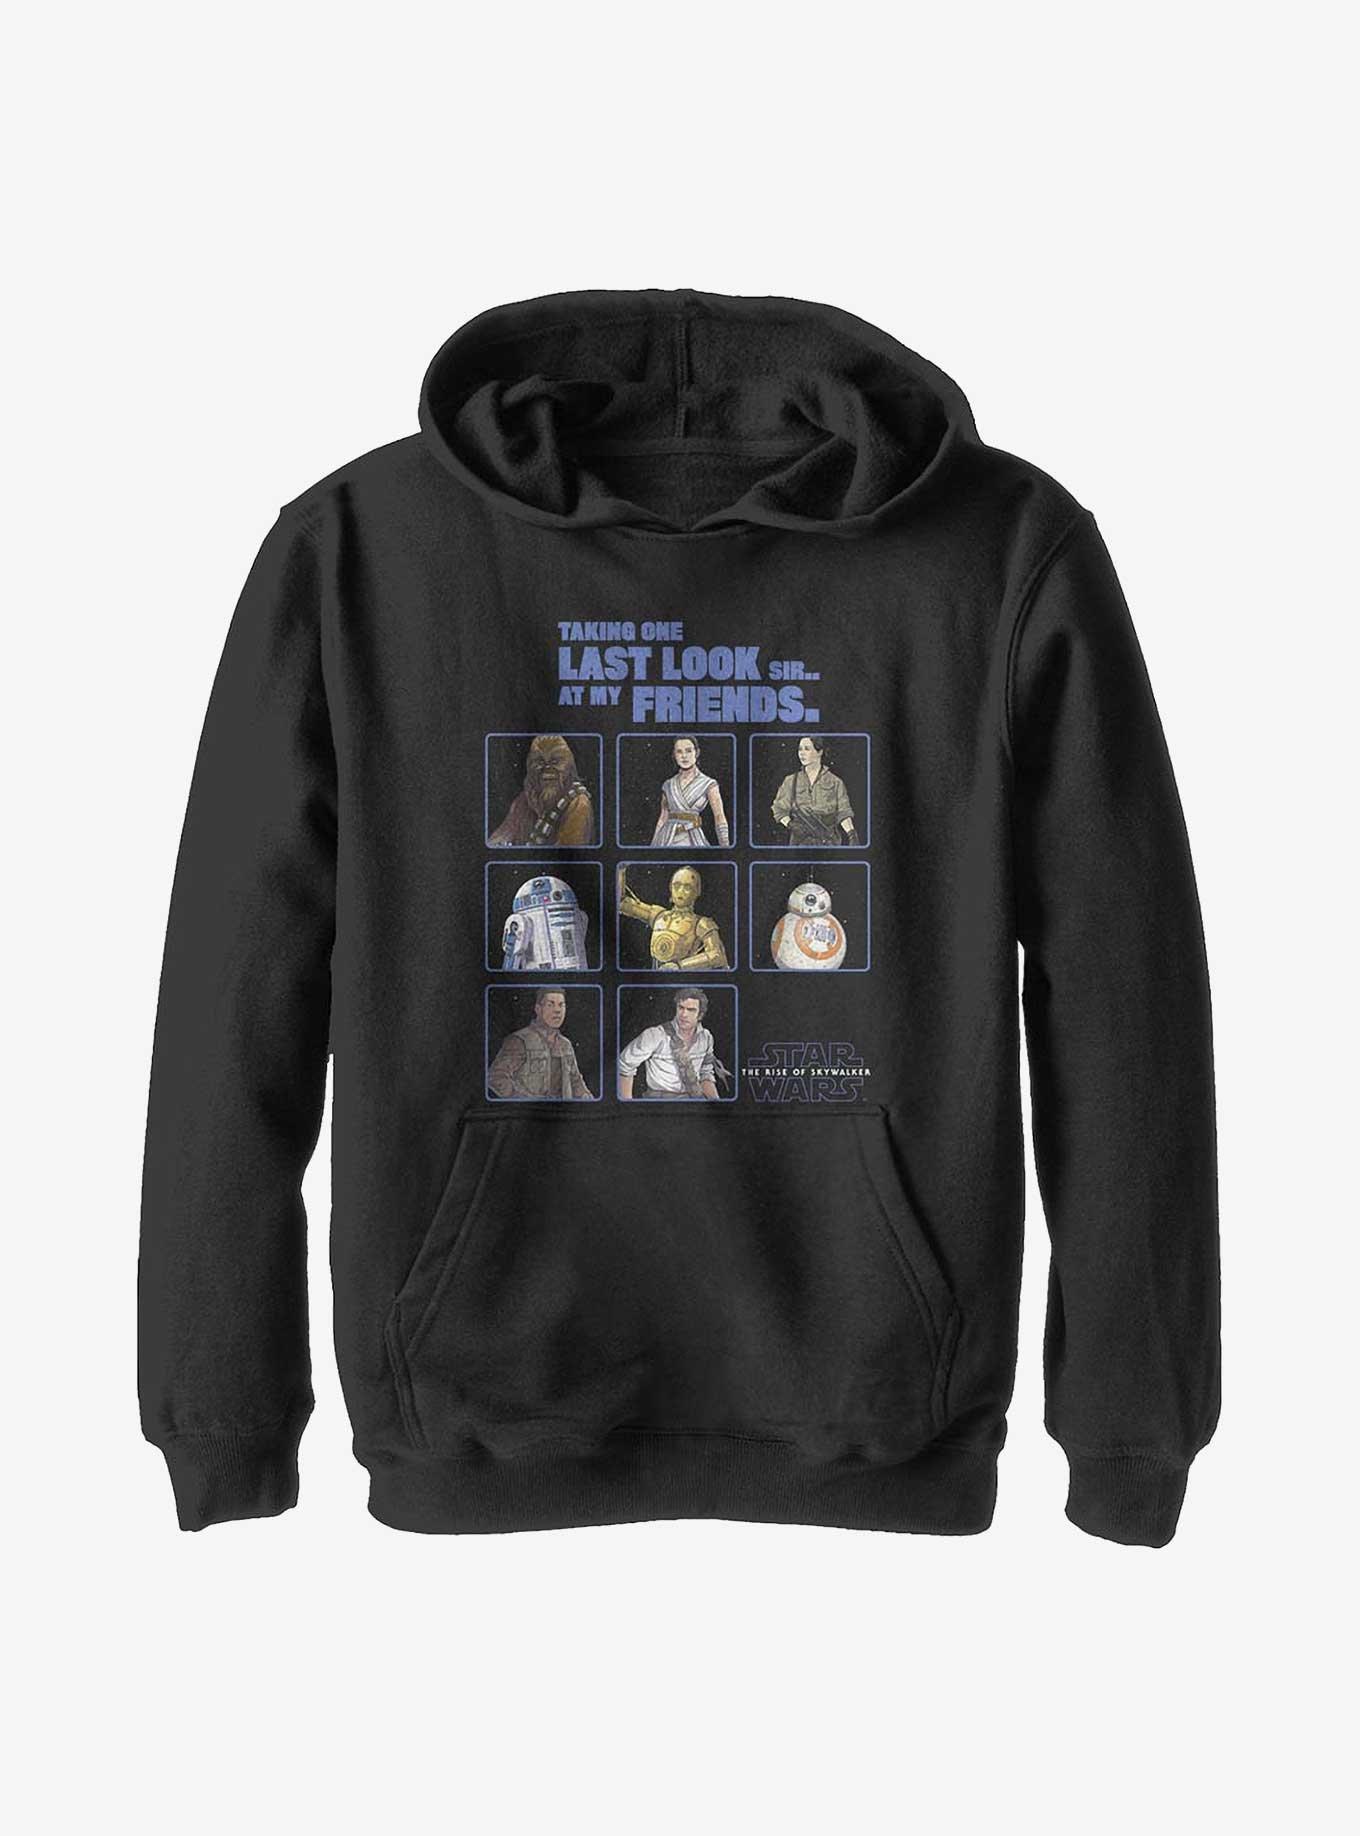 Star Wars Episode IX: The Rise Of Skywalker Boxed Friends Youth Hoodie, BLACK, hi-res